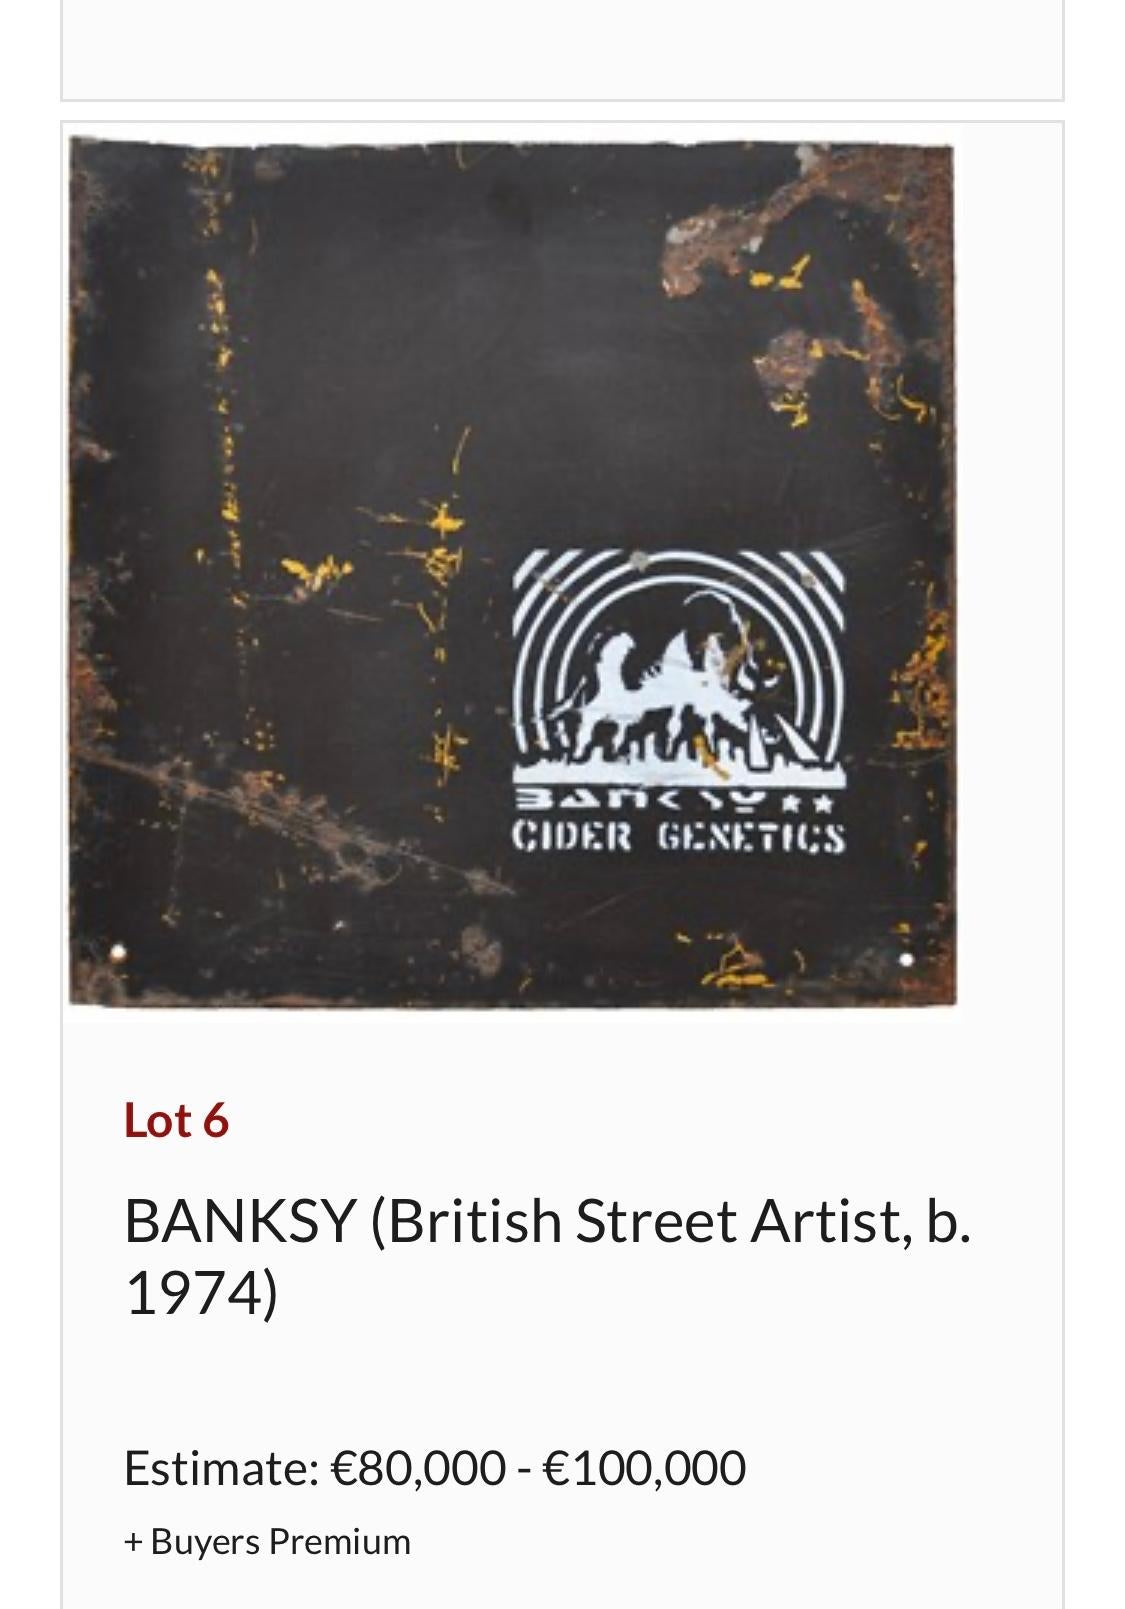 Aerosol Spray Paint on Metal Sheet
Size unframed: 40 x 40 cm (15,75 x 15,75 in).
Size framed: 55 x 55 cm

Signed BANKSY in the stencil. A very early example of the BANKSY tag.

LITERATURE

– Listed in the ‘Catalogue Raisonne of Banksy’s Street Art’,